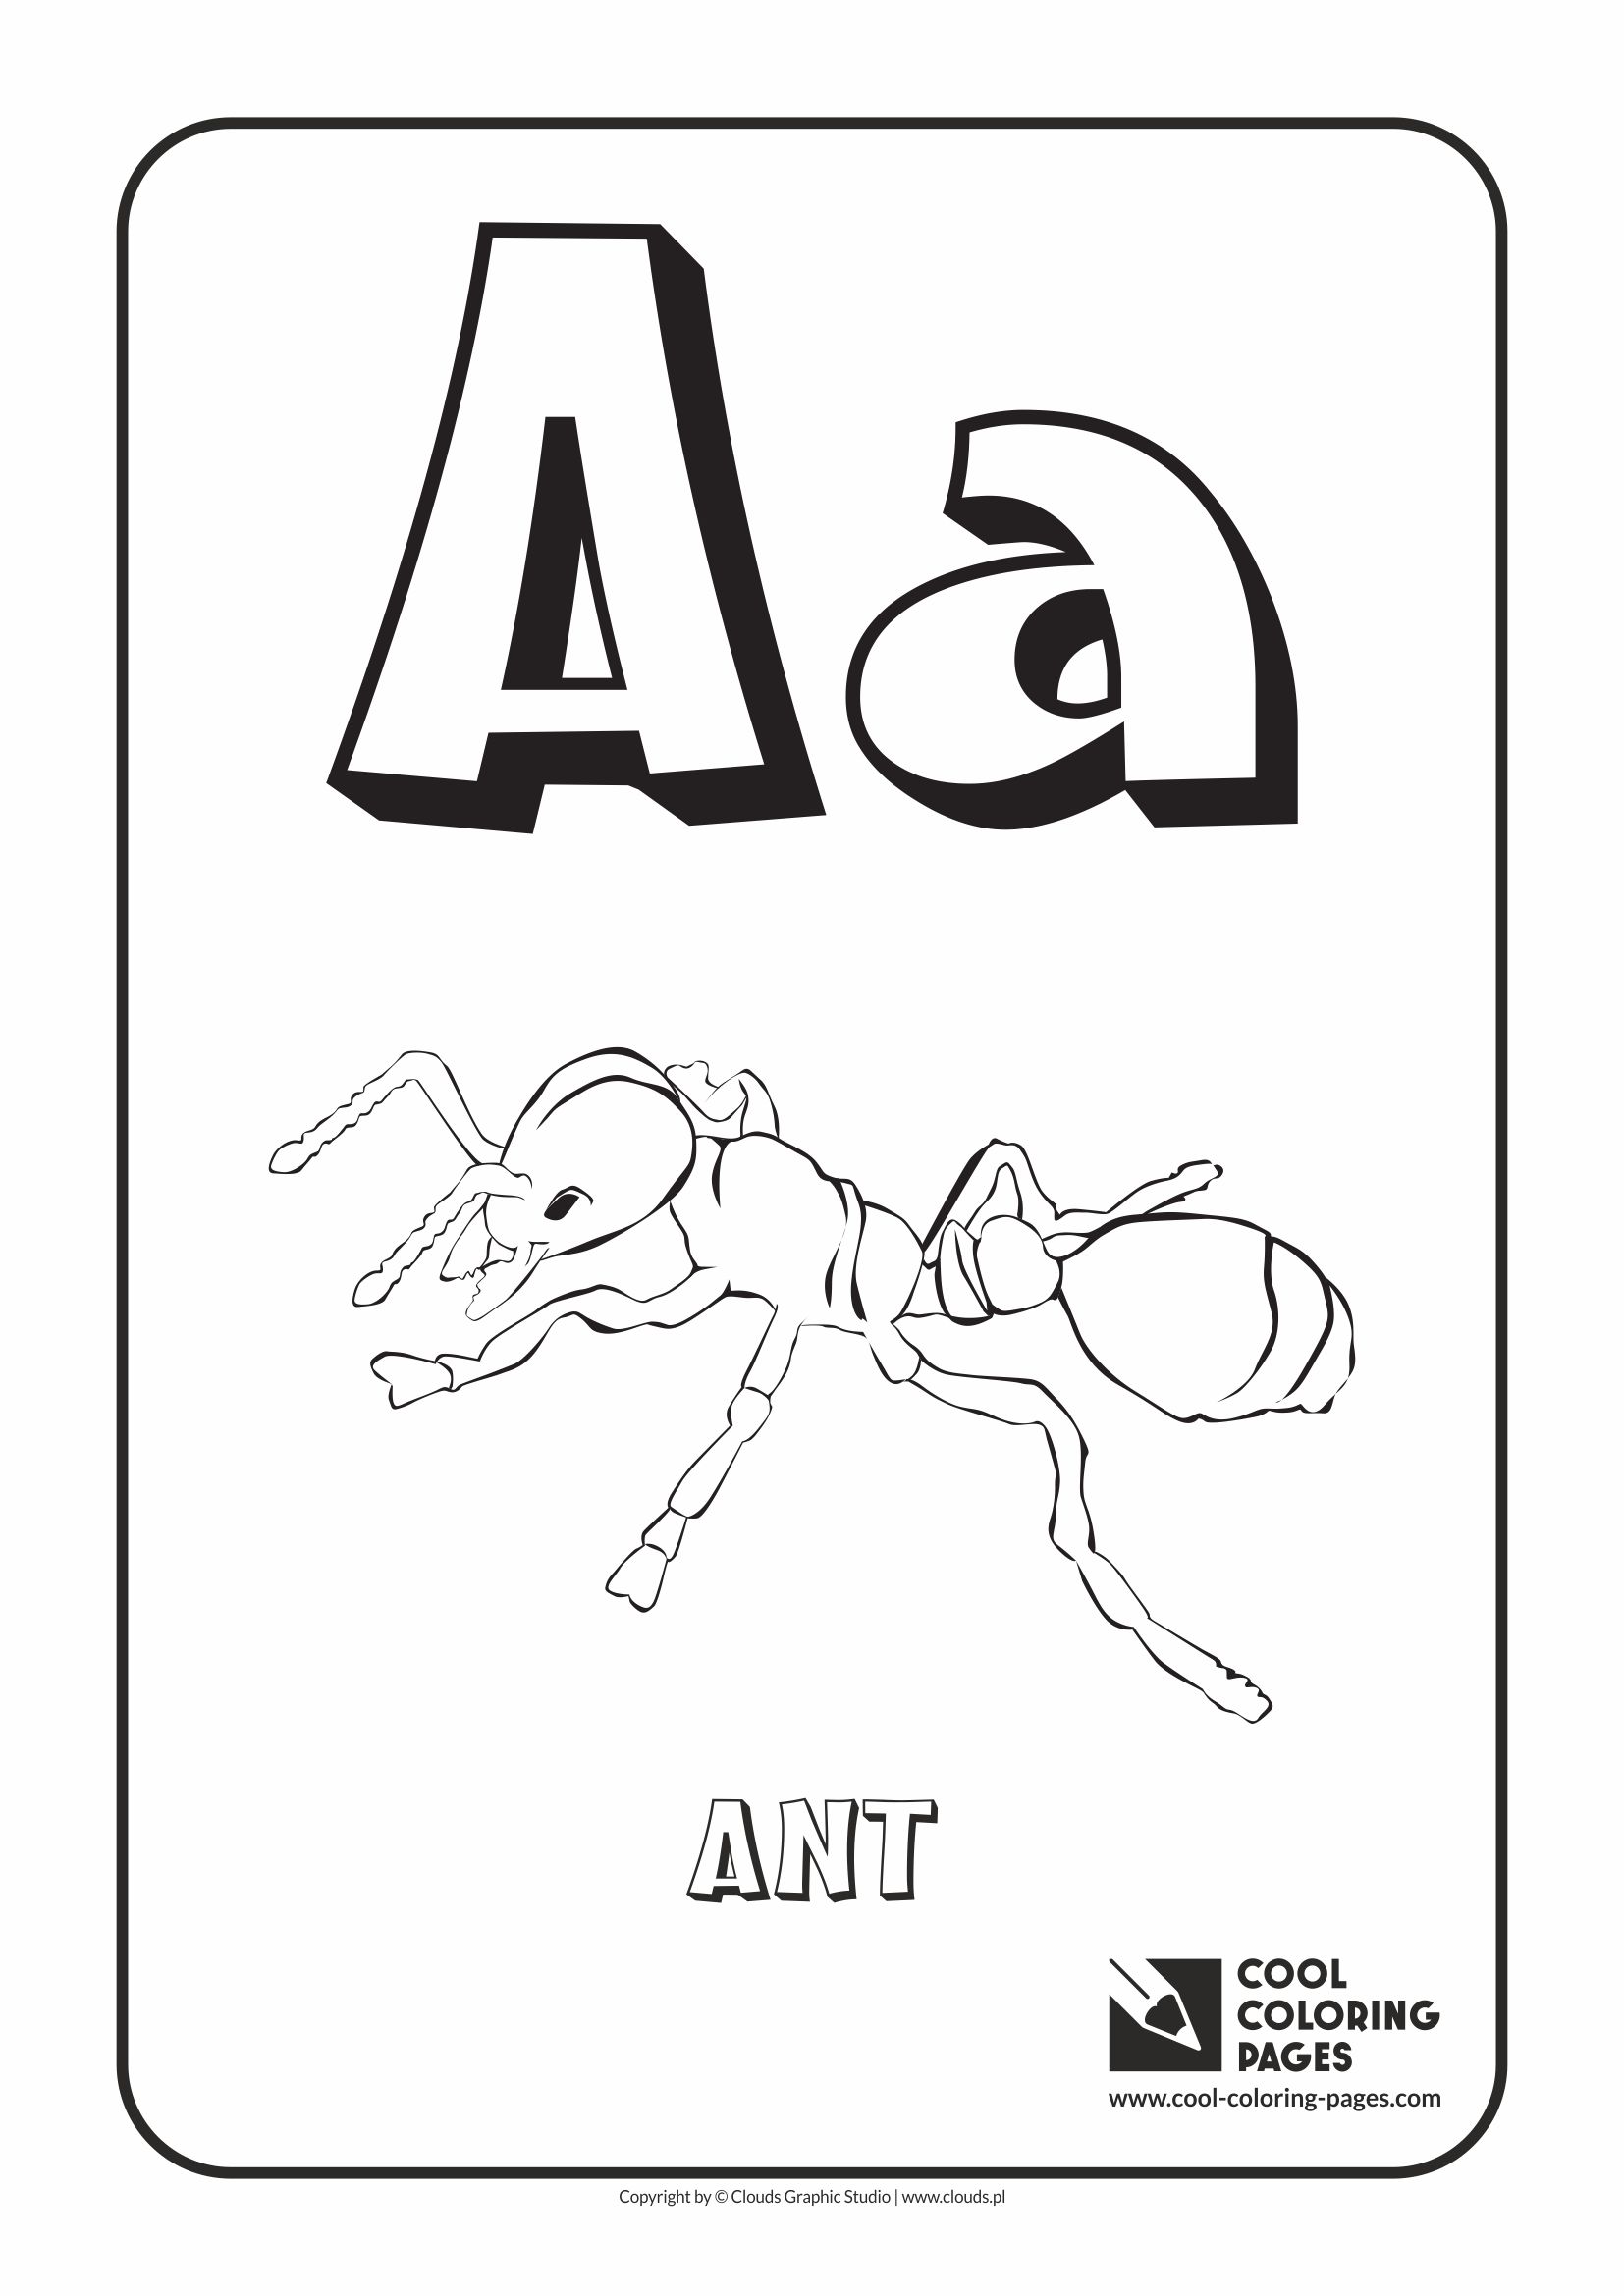 Cool Coloring Pages Alphabet coloring pages - Cool Coloring Pages